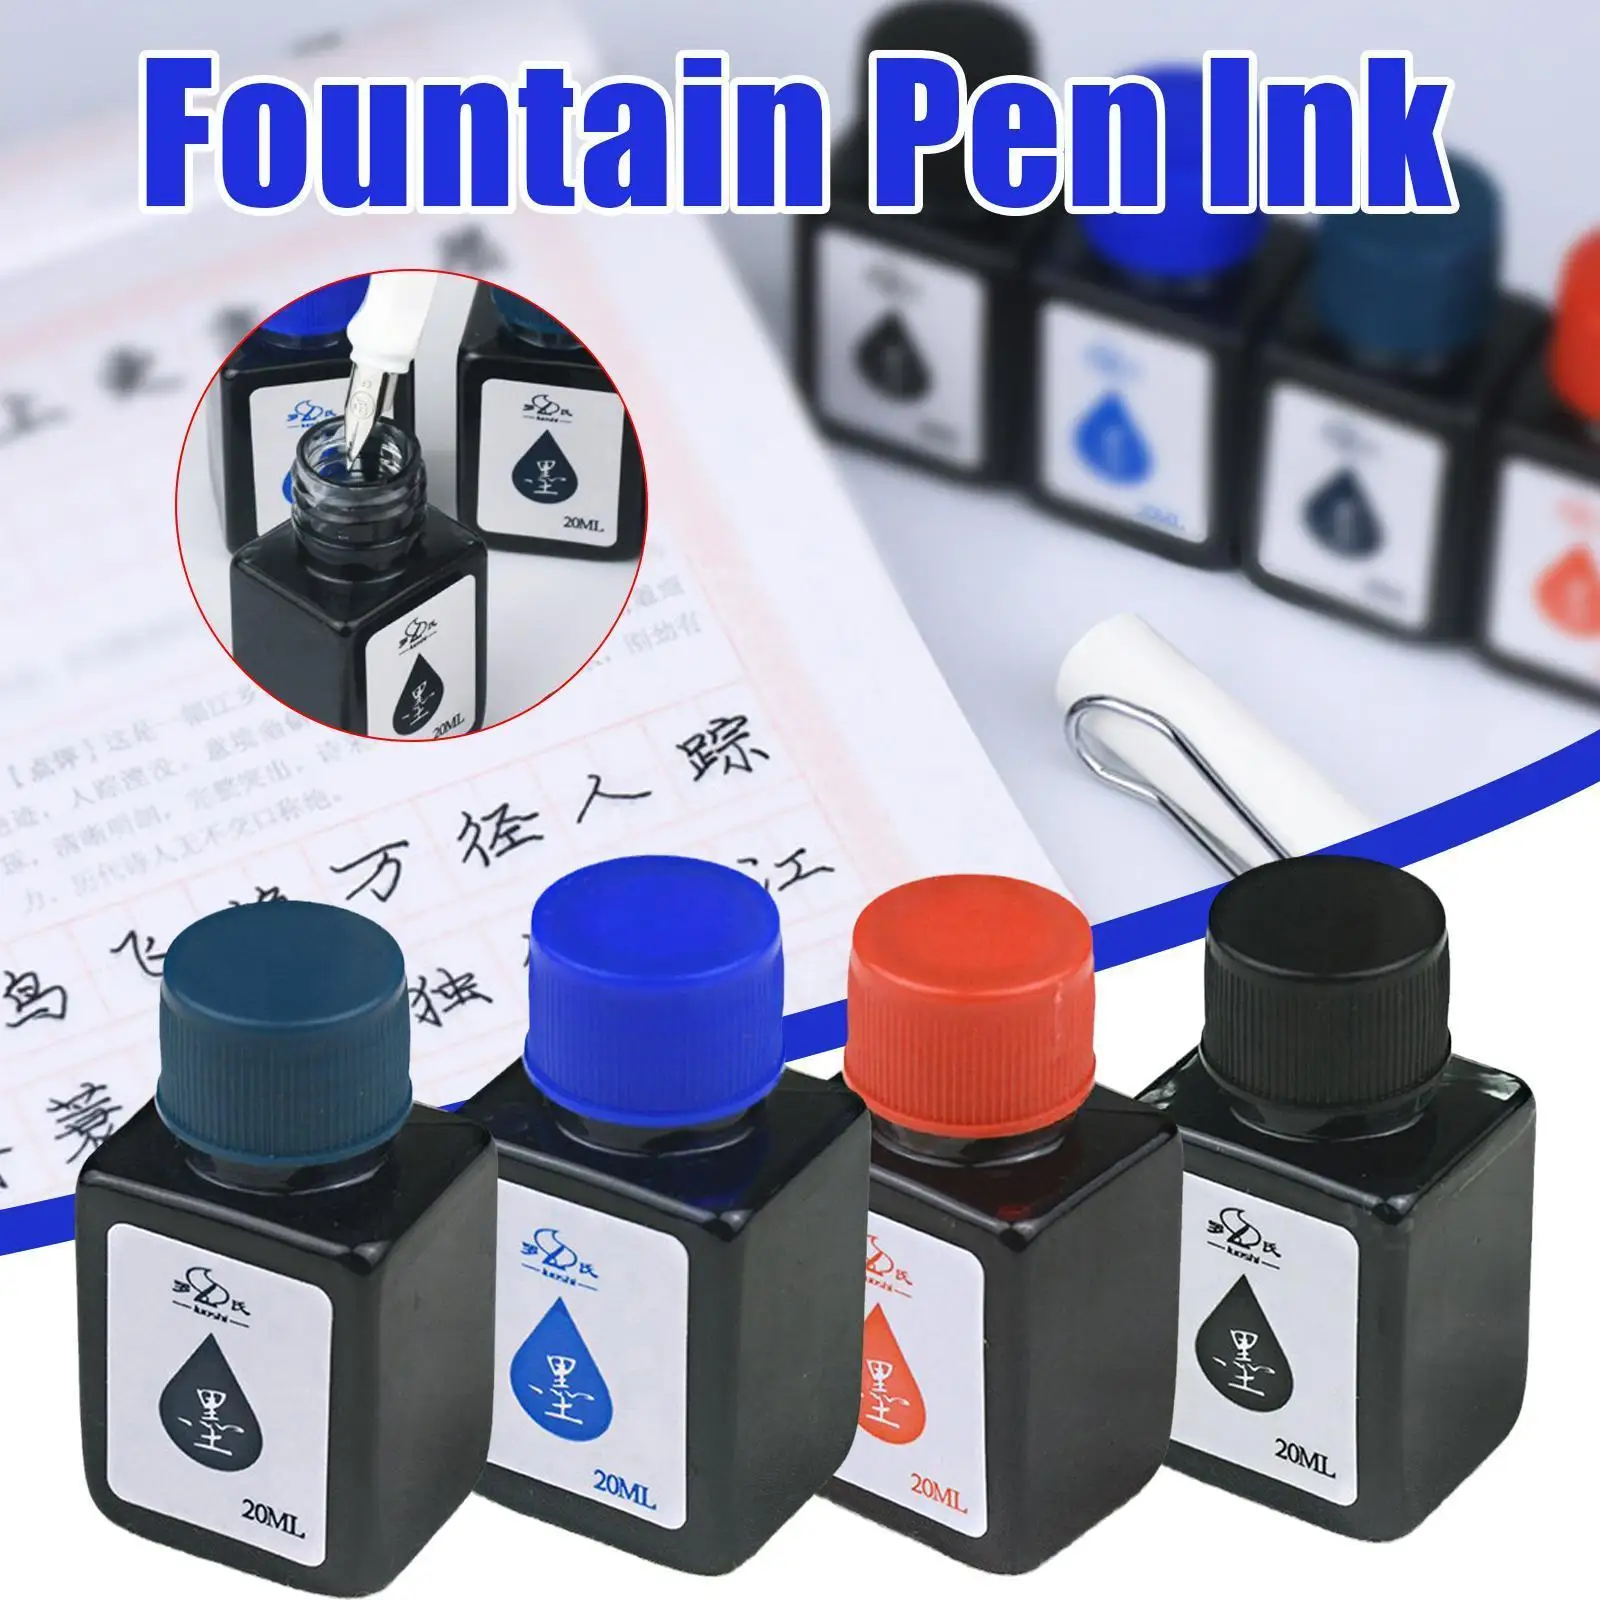 

20ml Fountain Pen Ink Dip Pen Ink Bottle Blue Ink Refilling Available Stationery Ink Inks Students Art Sac Calligraphy Writ B6t6